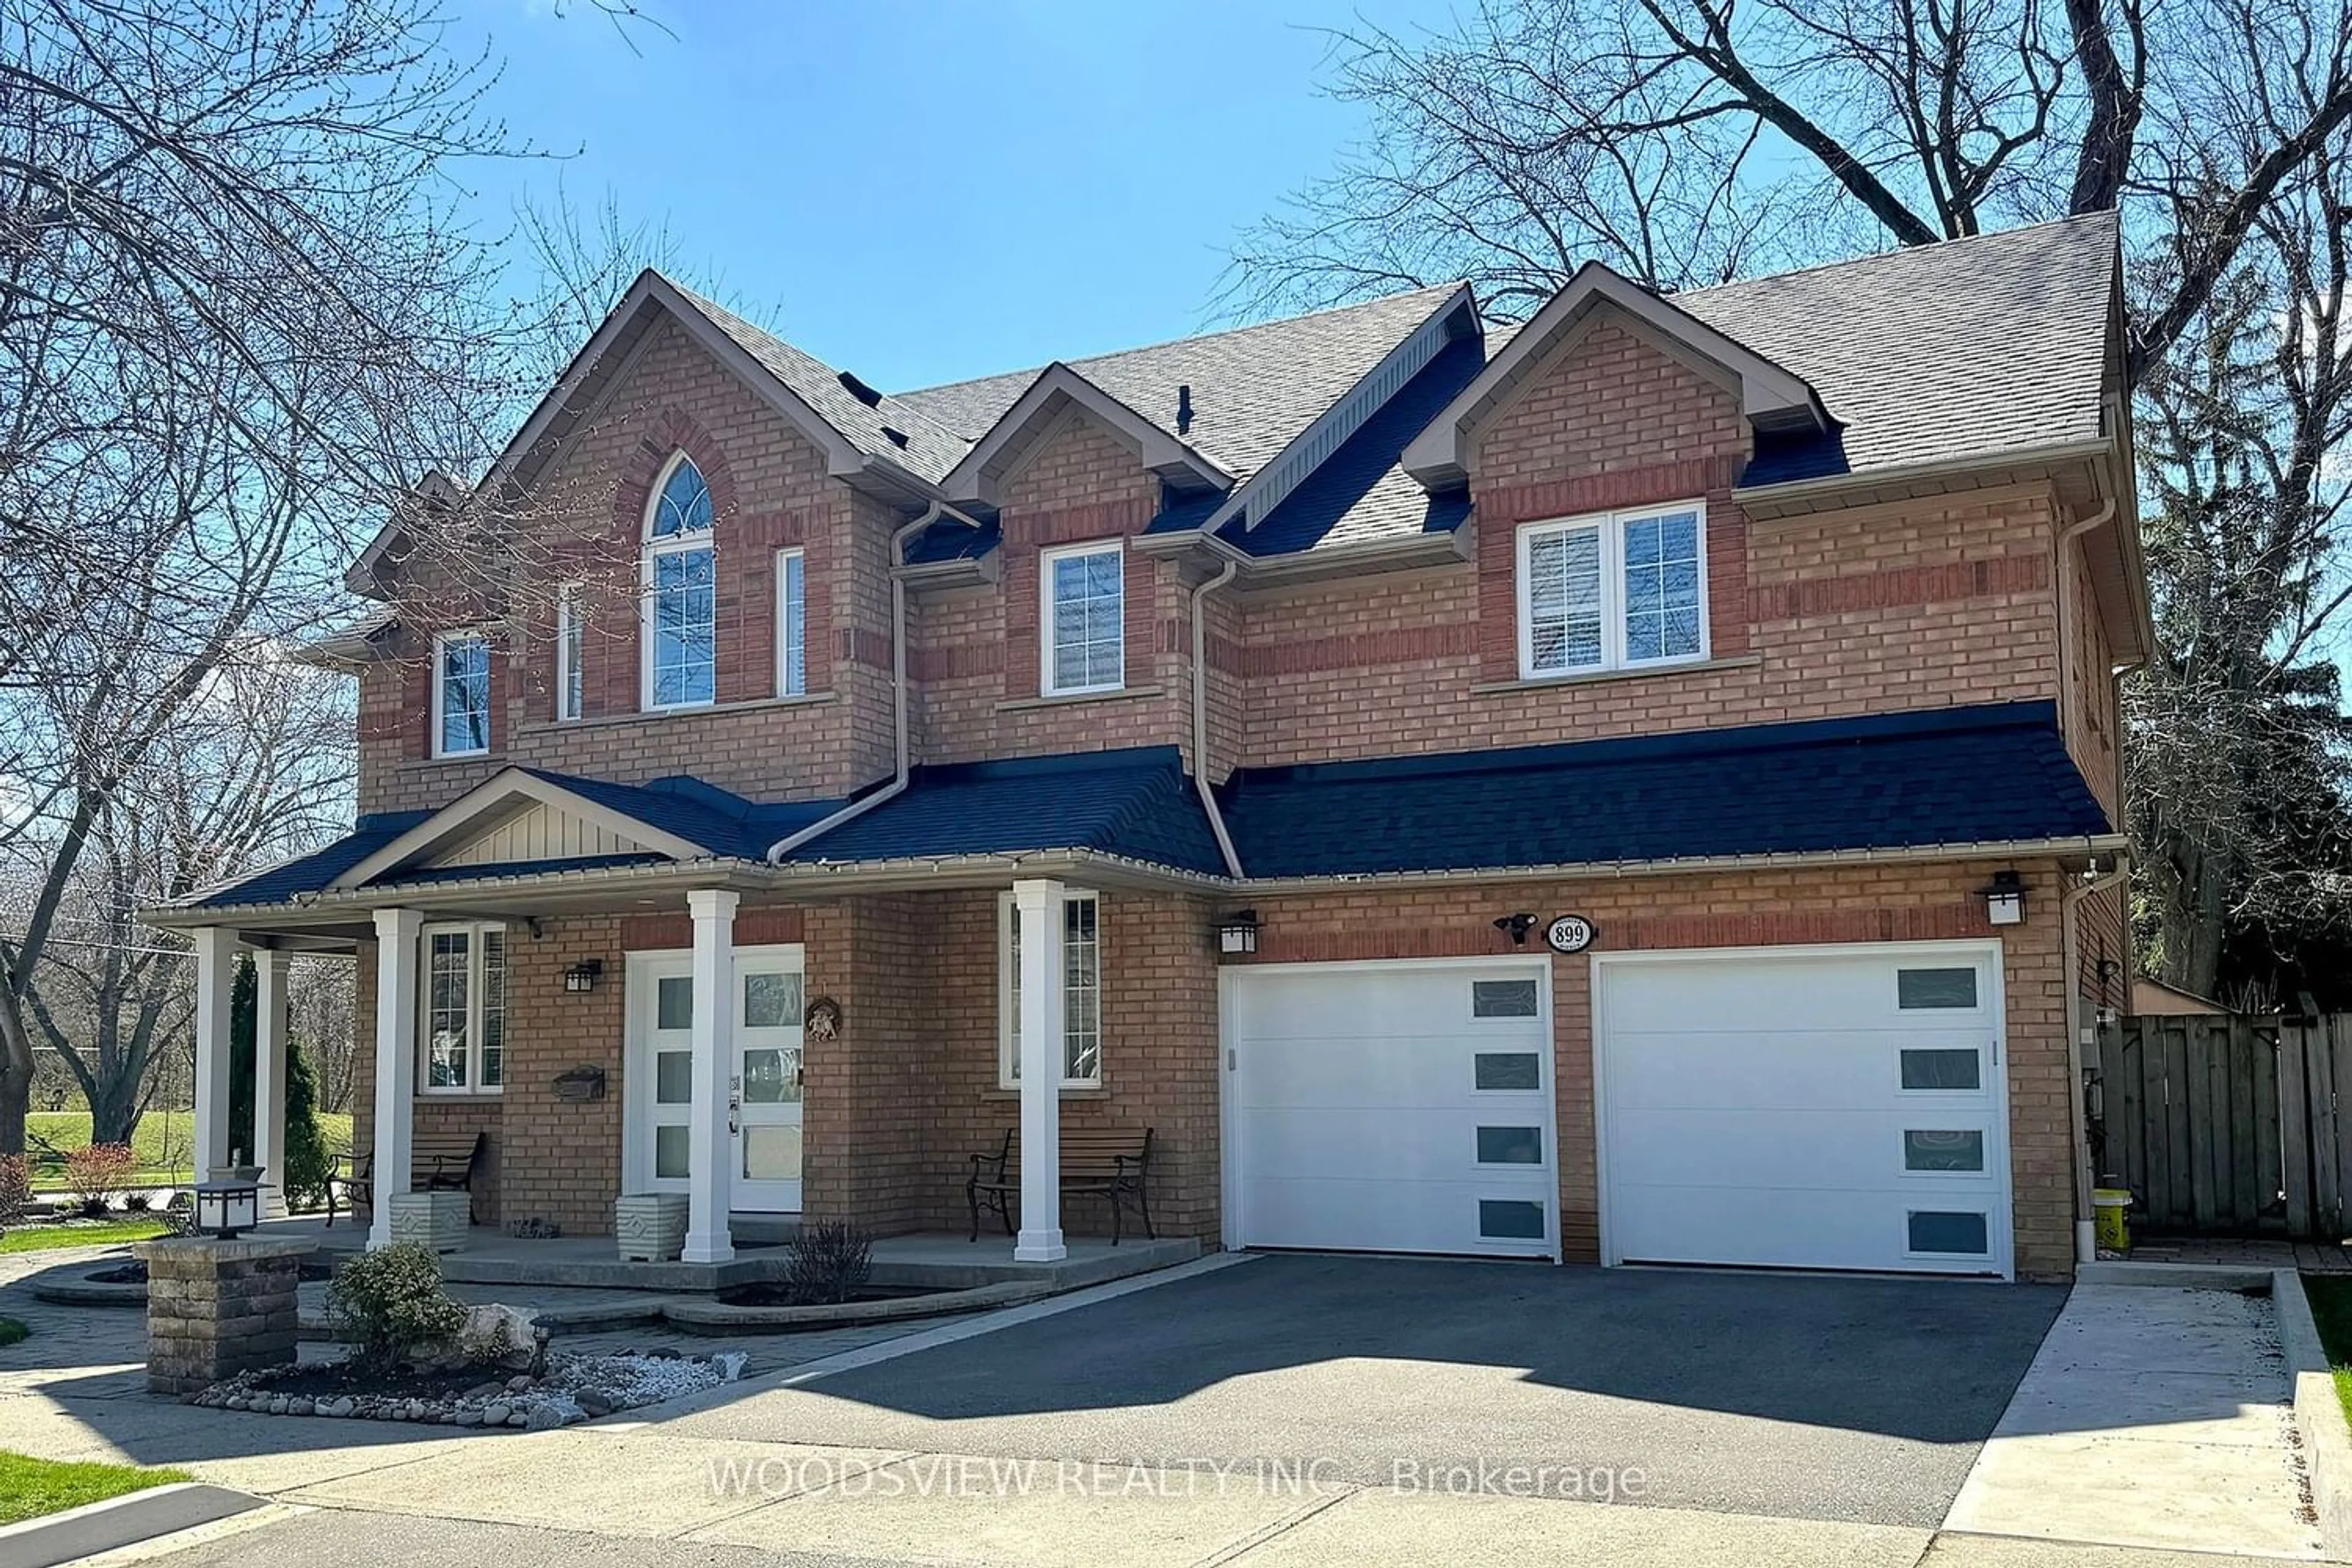 Home with brick exterior material for 899 Voyager Ave, Pickering Ontario L1V 7G2